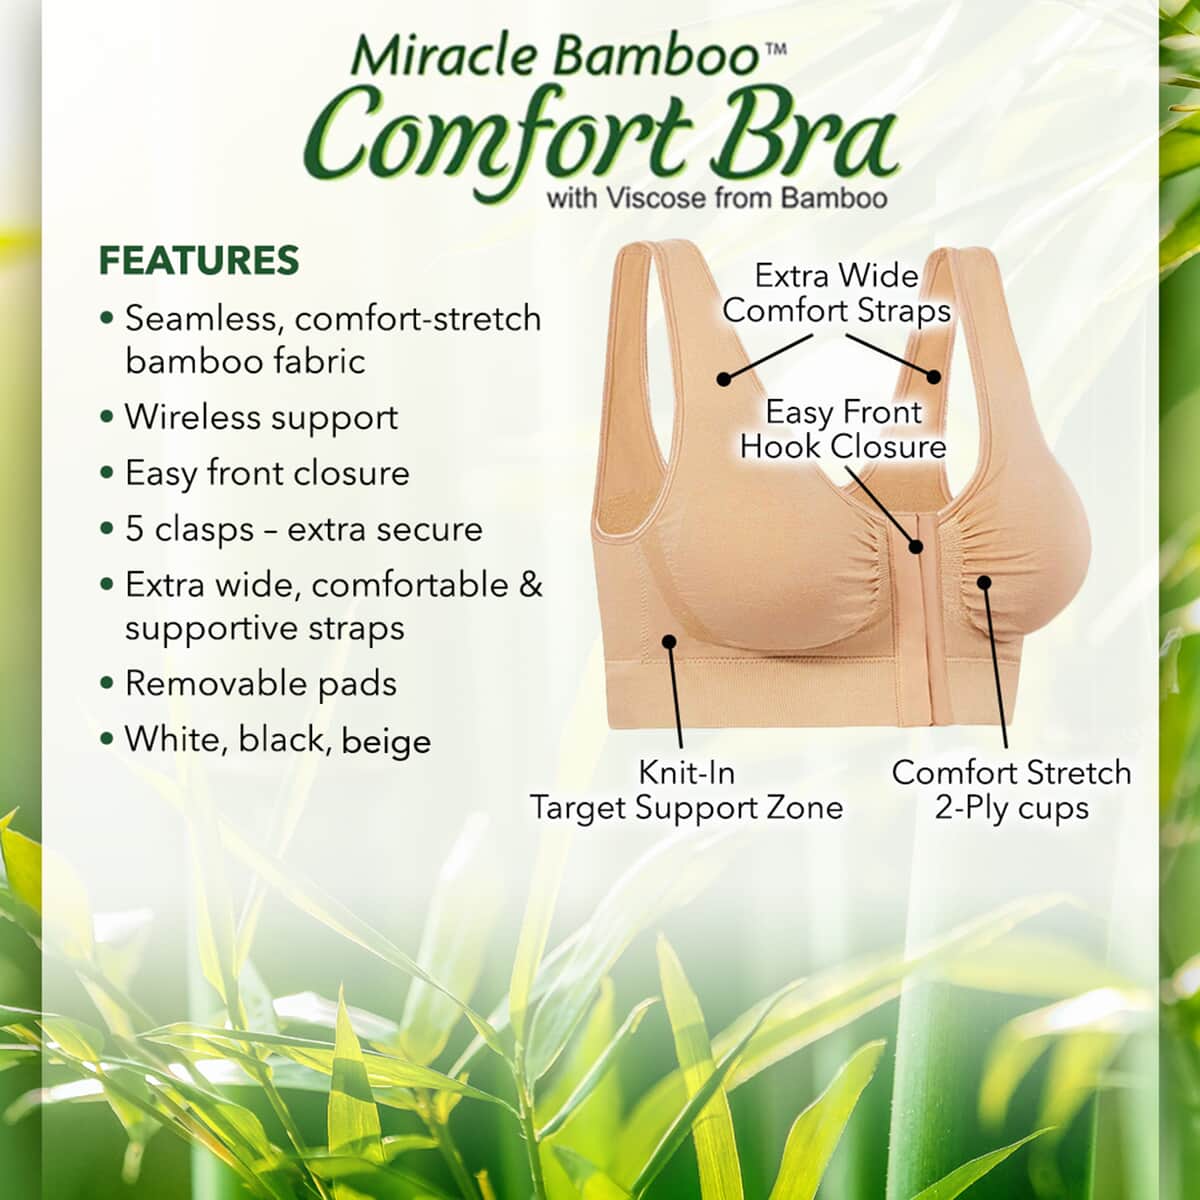 Miracle Bamboo Beyond Comfort Bra Set of 3 Front Closure Bras - Black, Beige and White - Size M image number 1